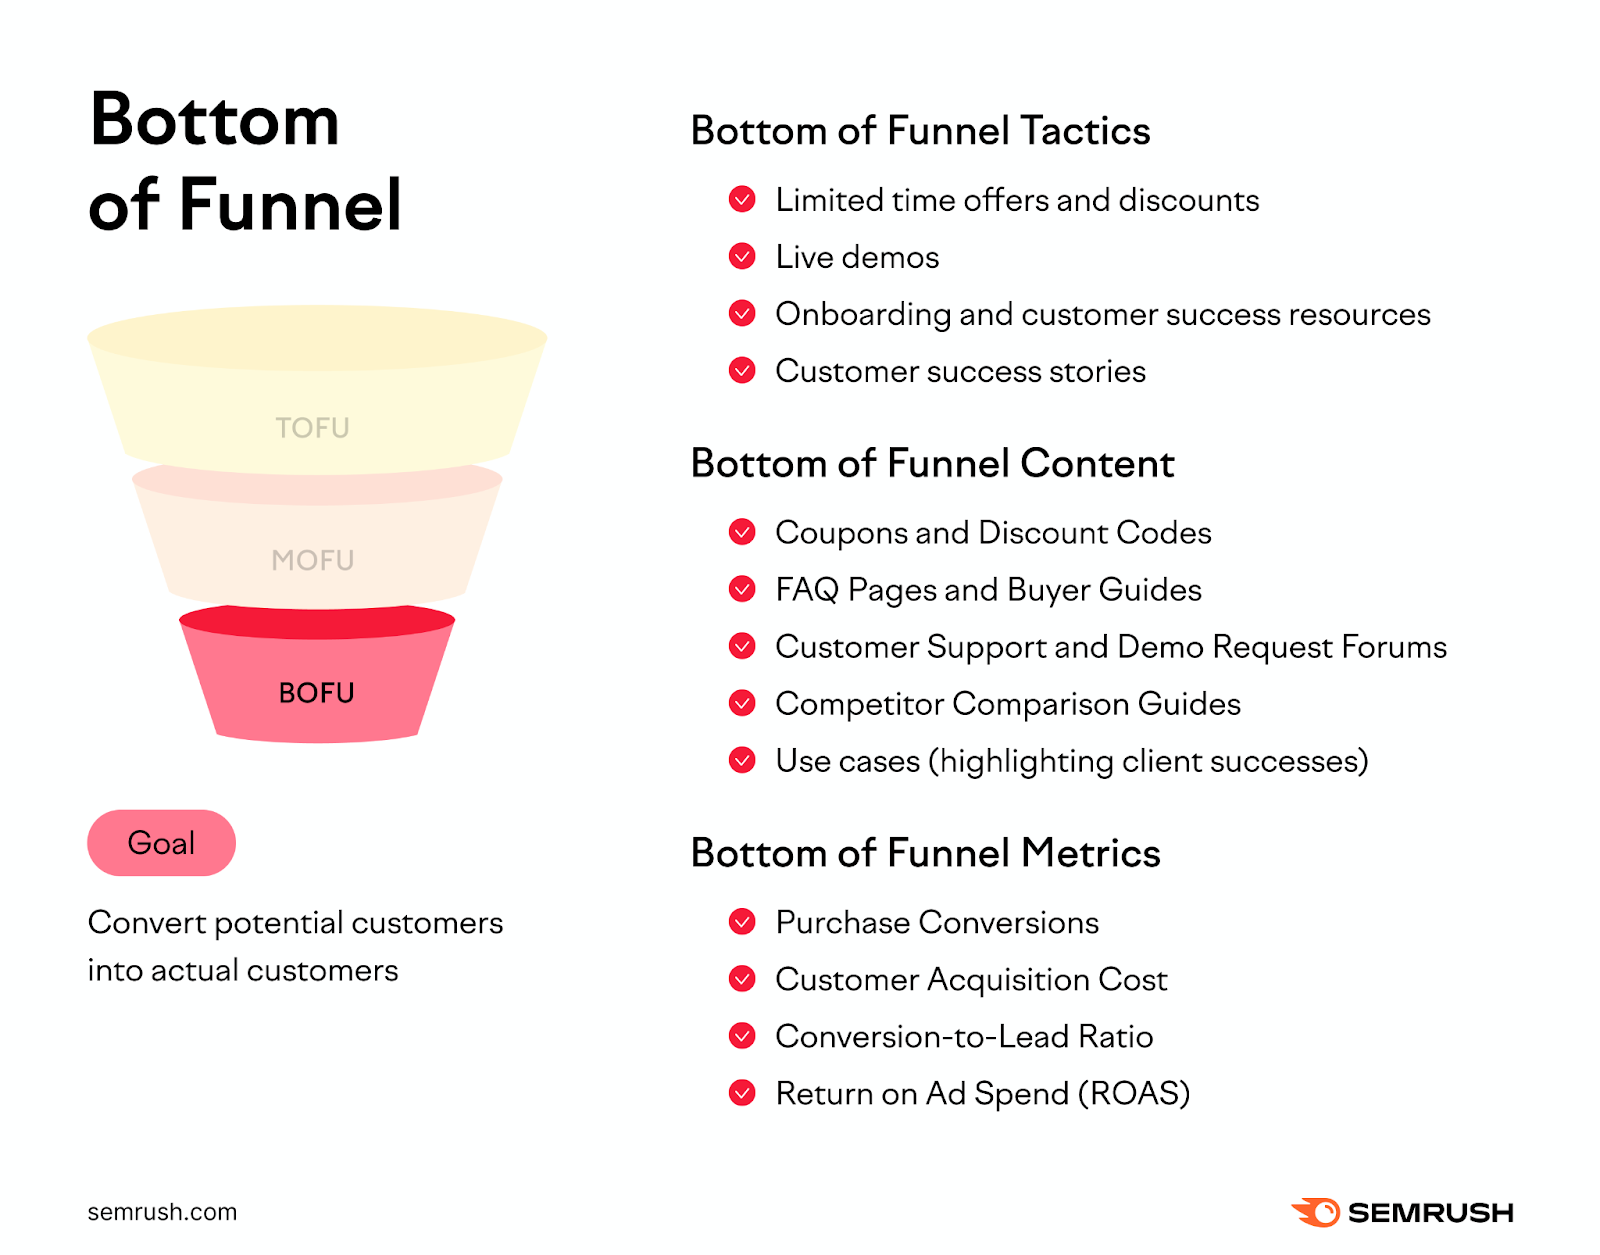 bottom of funnel goal is to convert prospects into customers. this part of the funnel has tactics, content, and metrics.